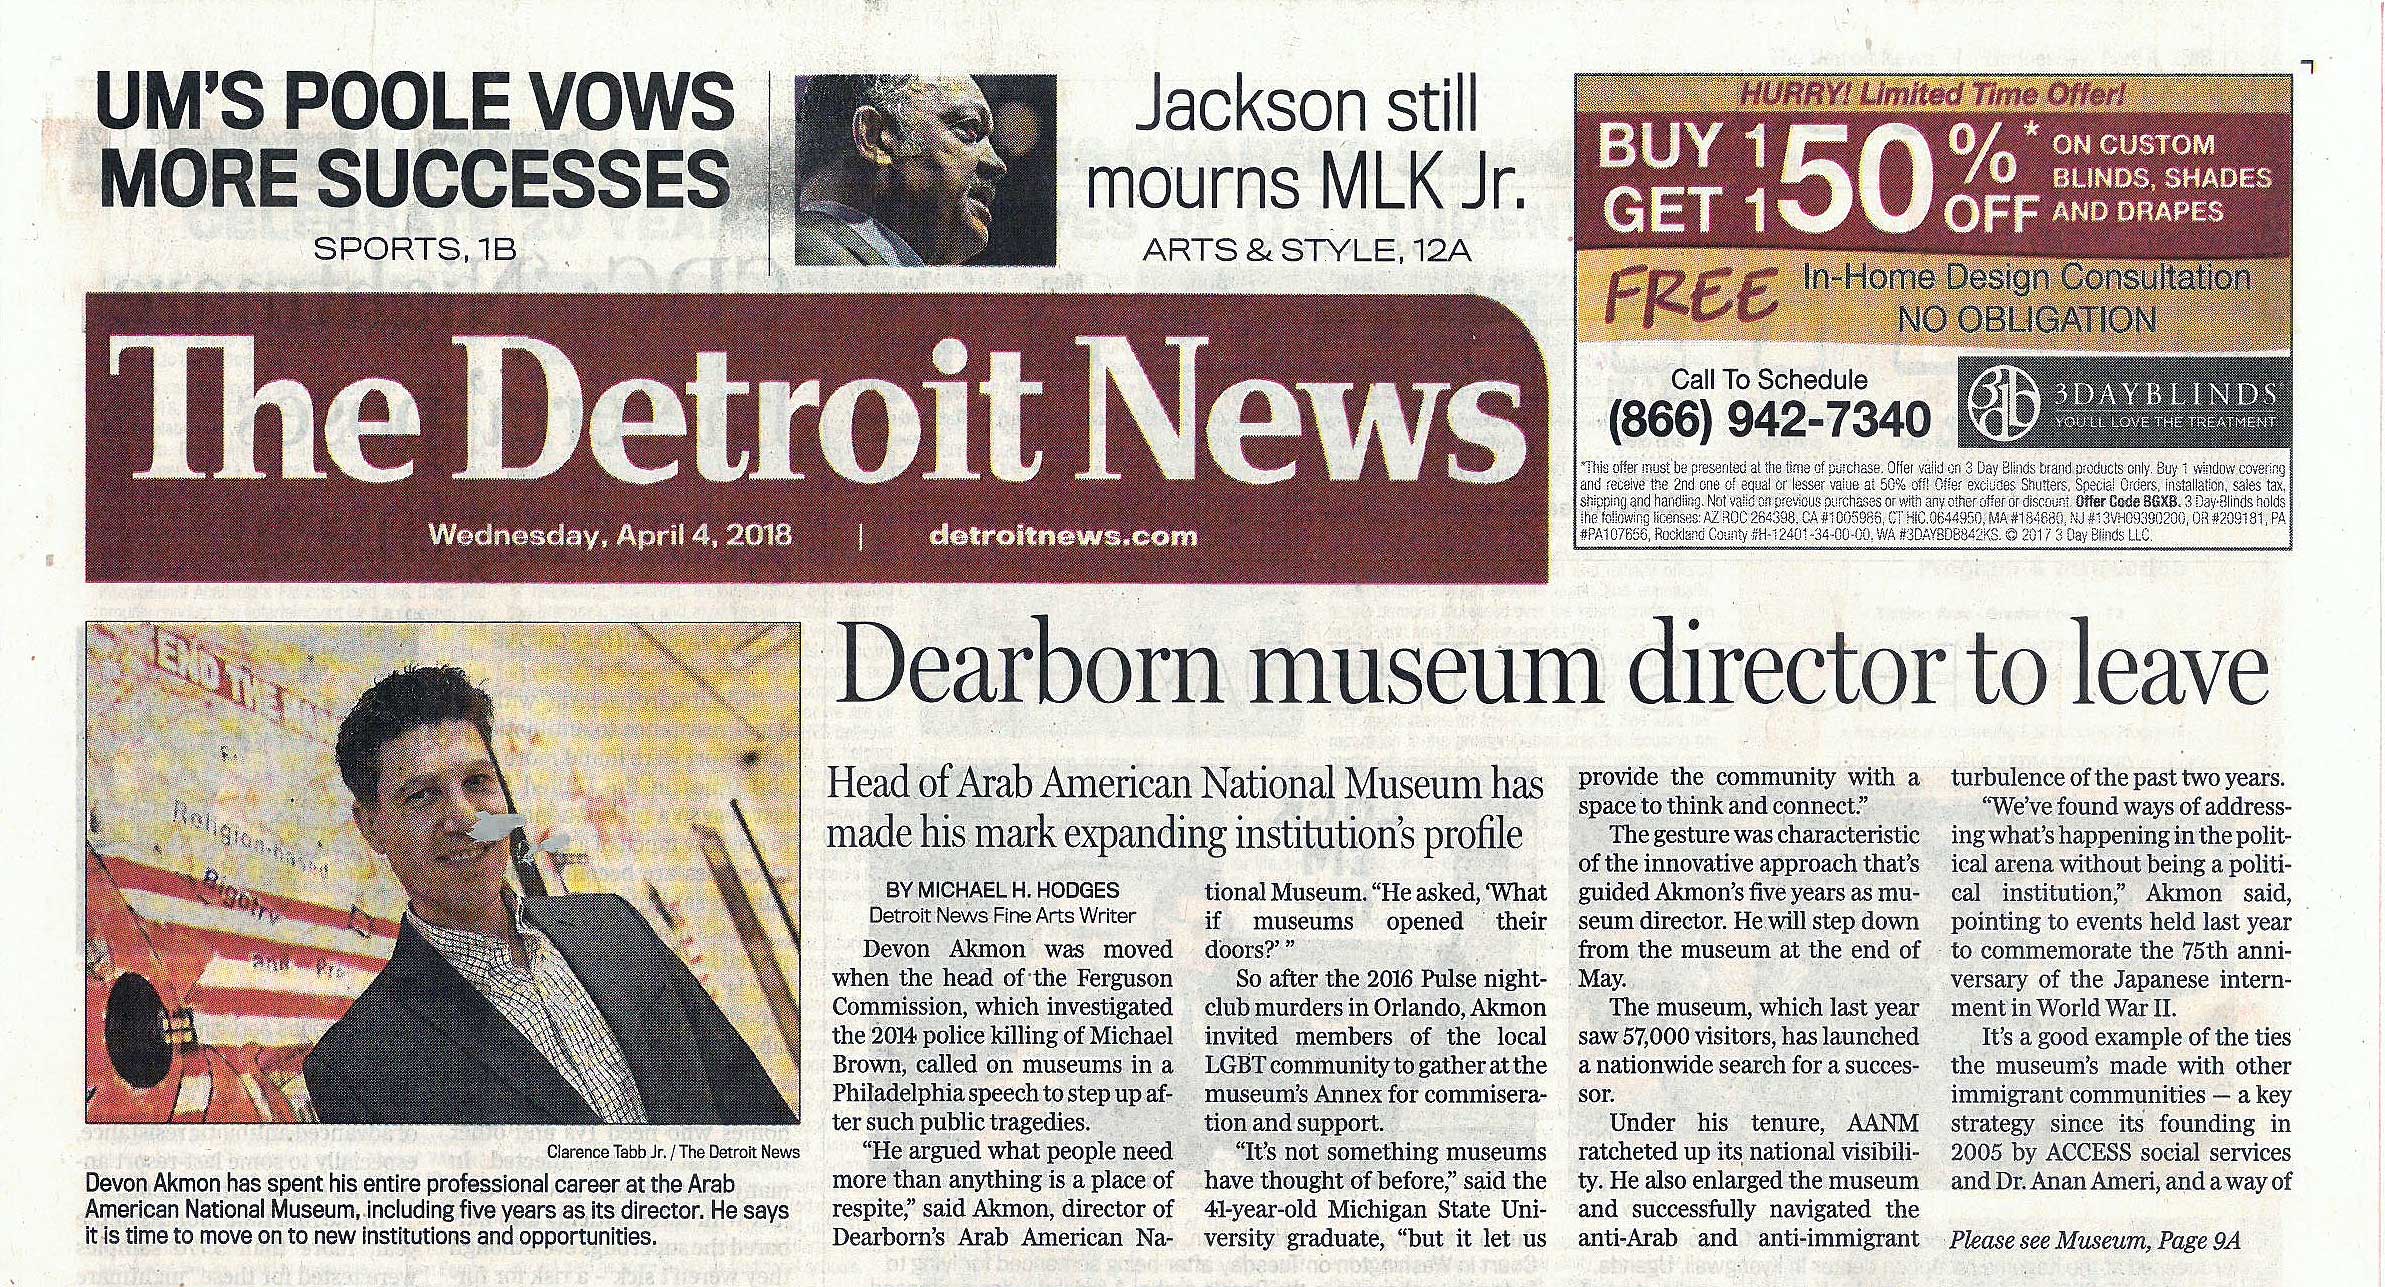 Departure Notification Featured in Detroit News